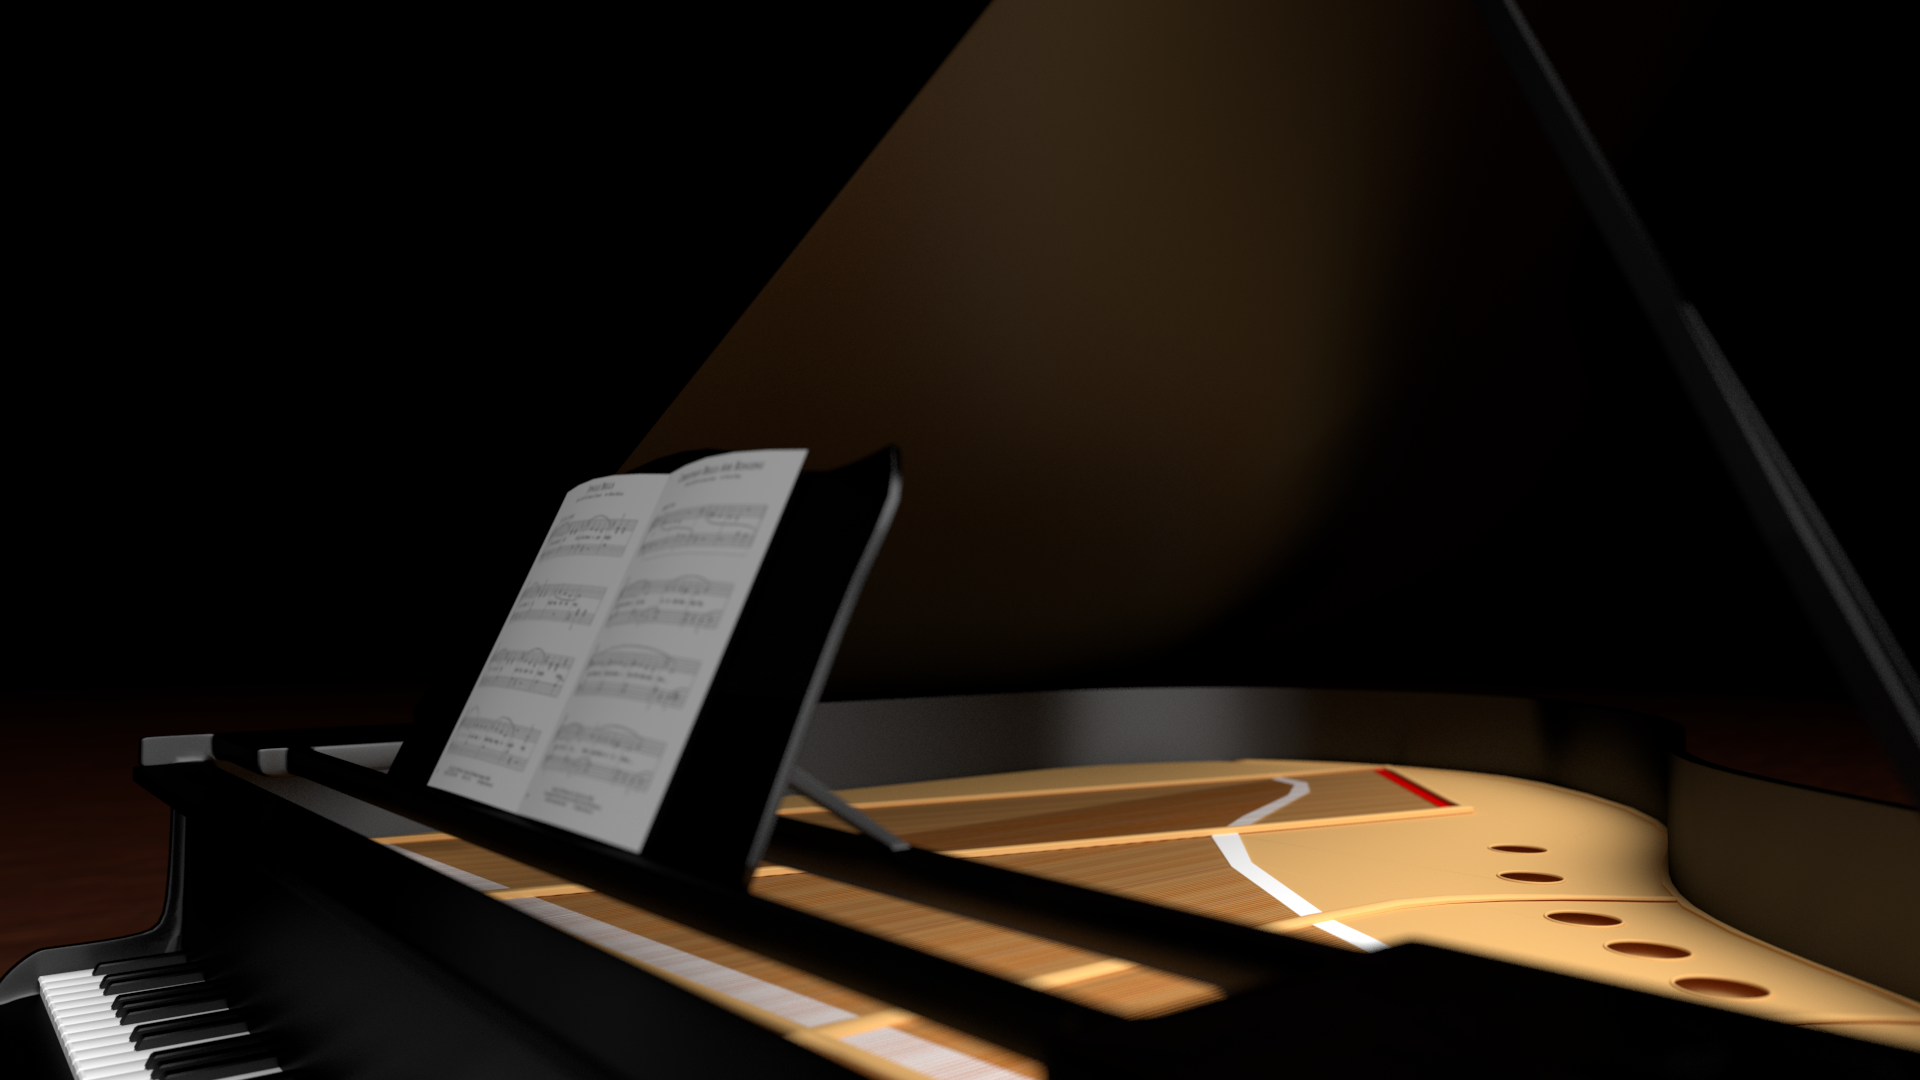 3D Printed a Grand Piano by Aaron Powell Design